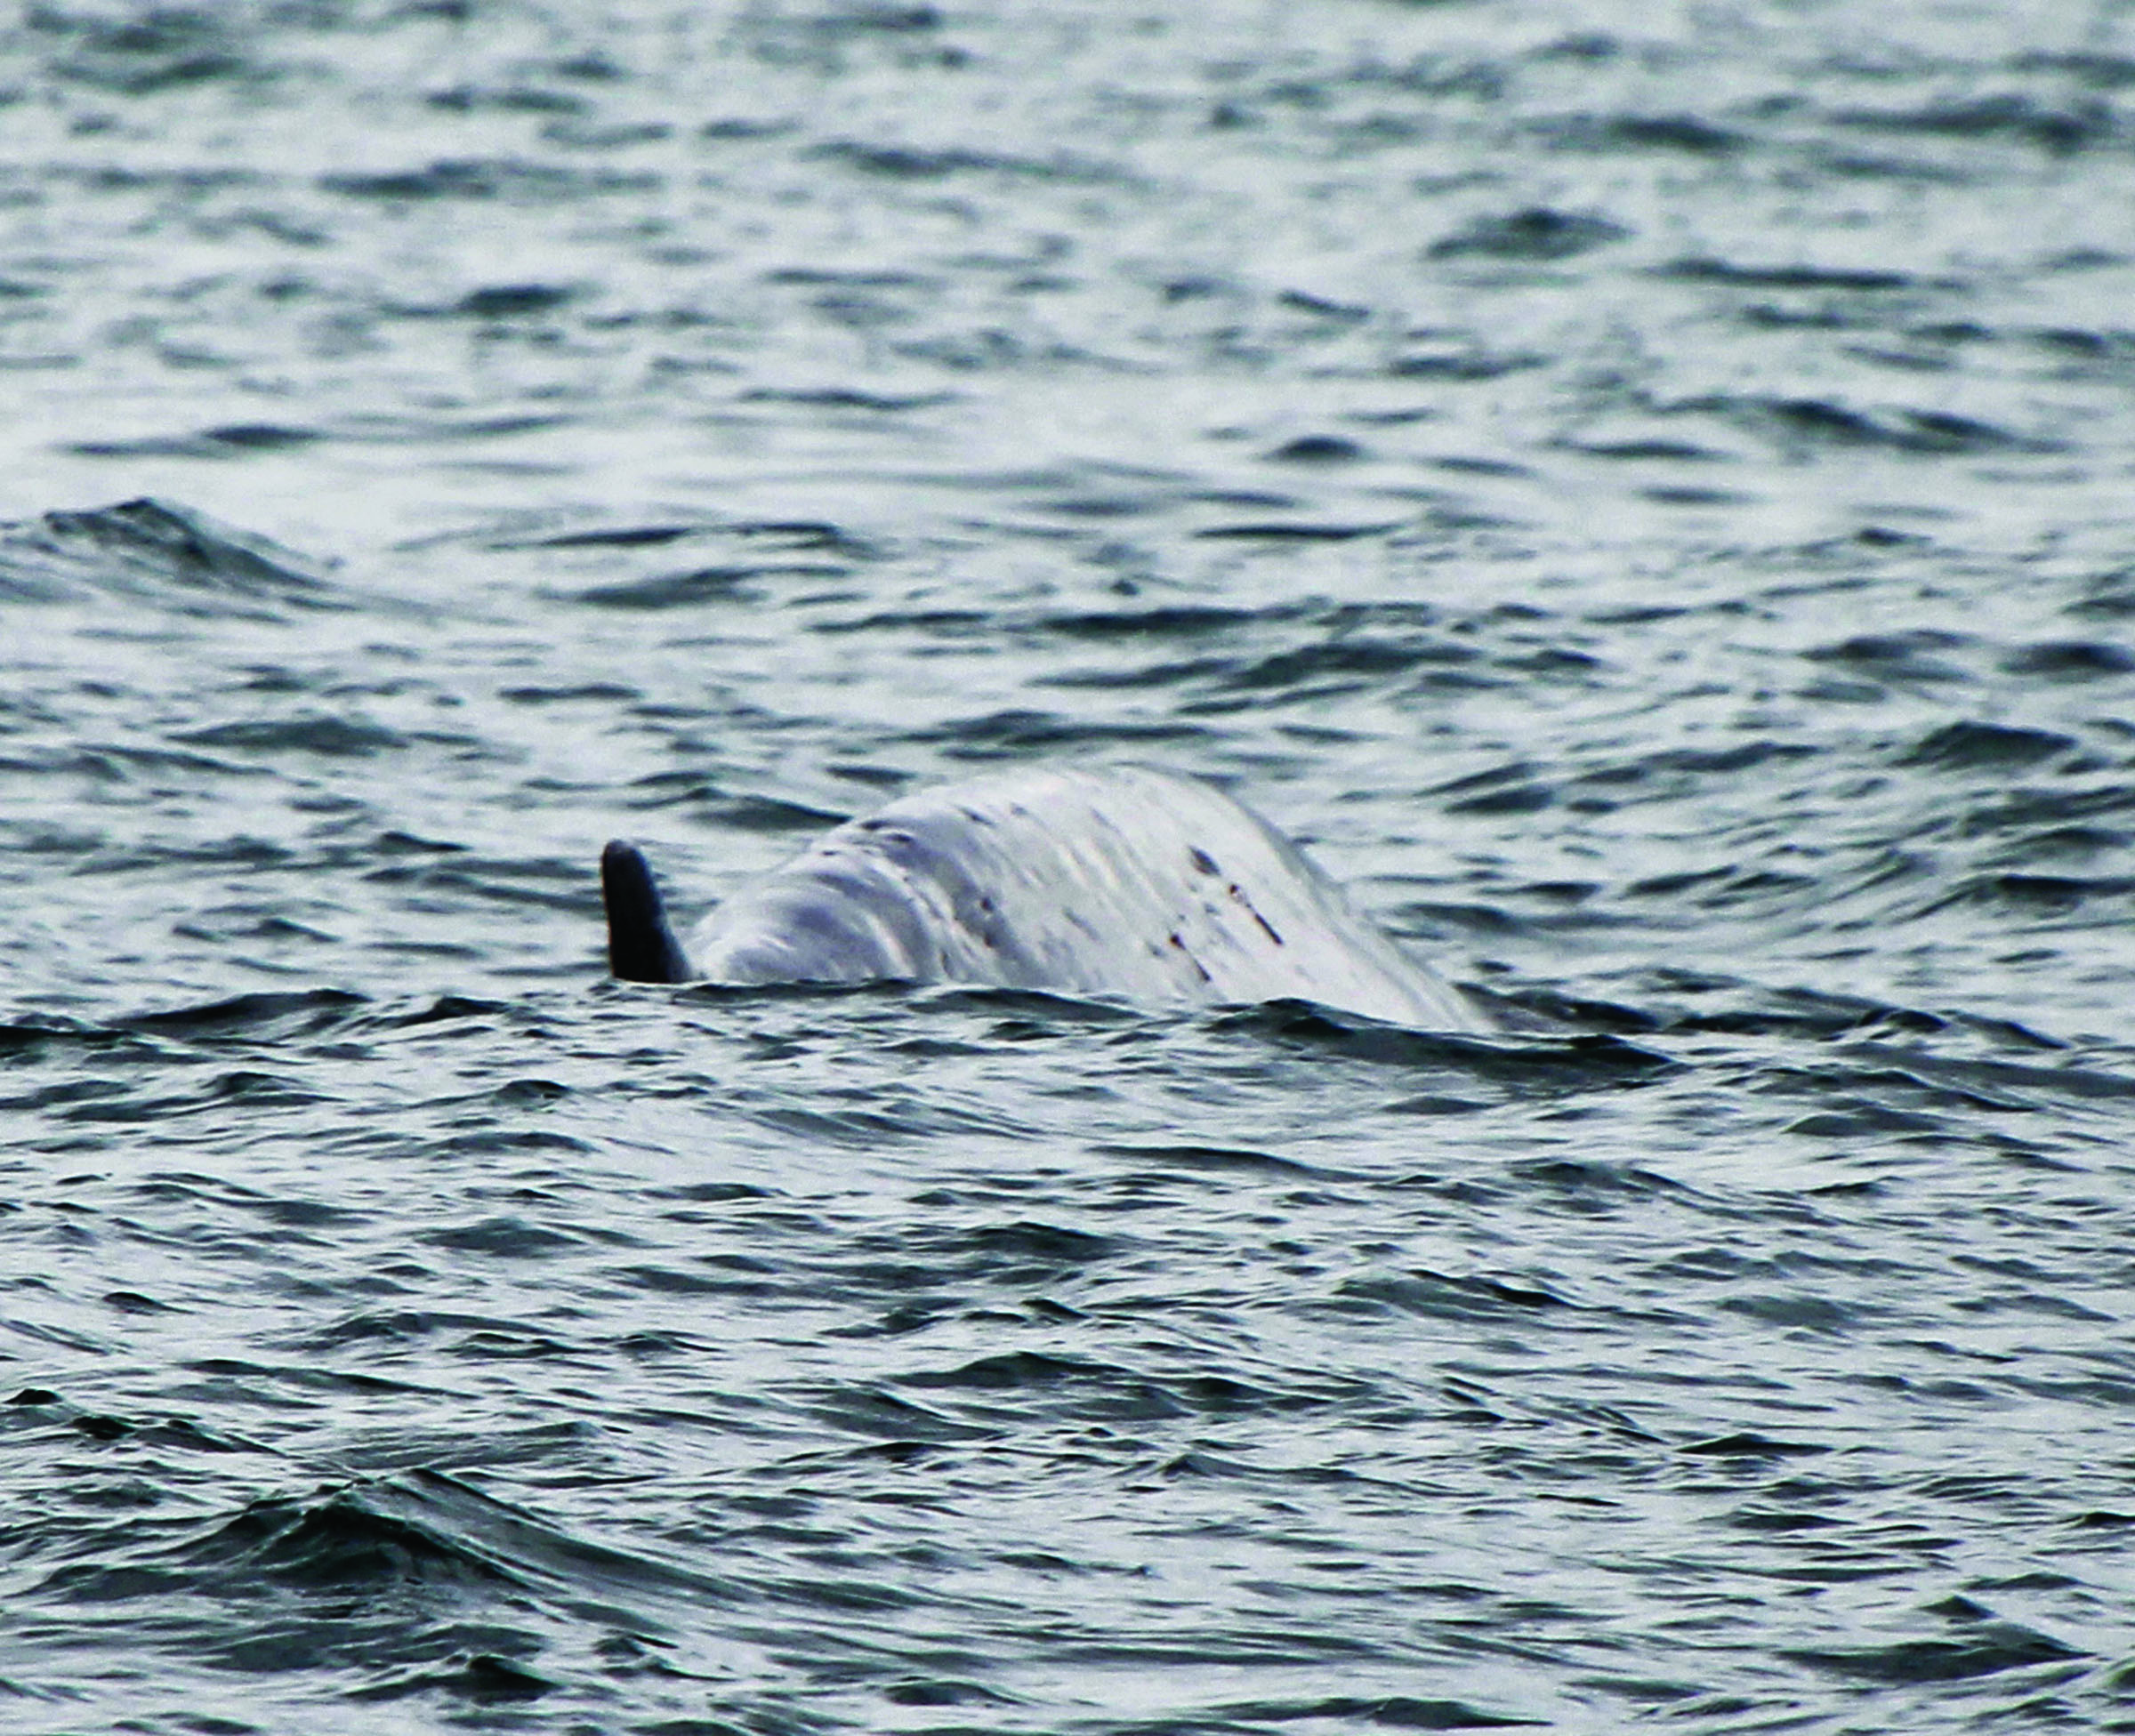 A fin whale surfaces last Tuesday in Puget Sound near Minor Island. Michael Harris